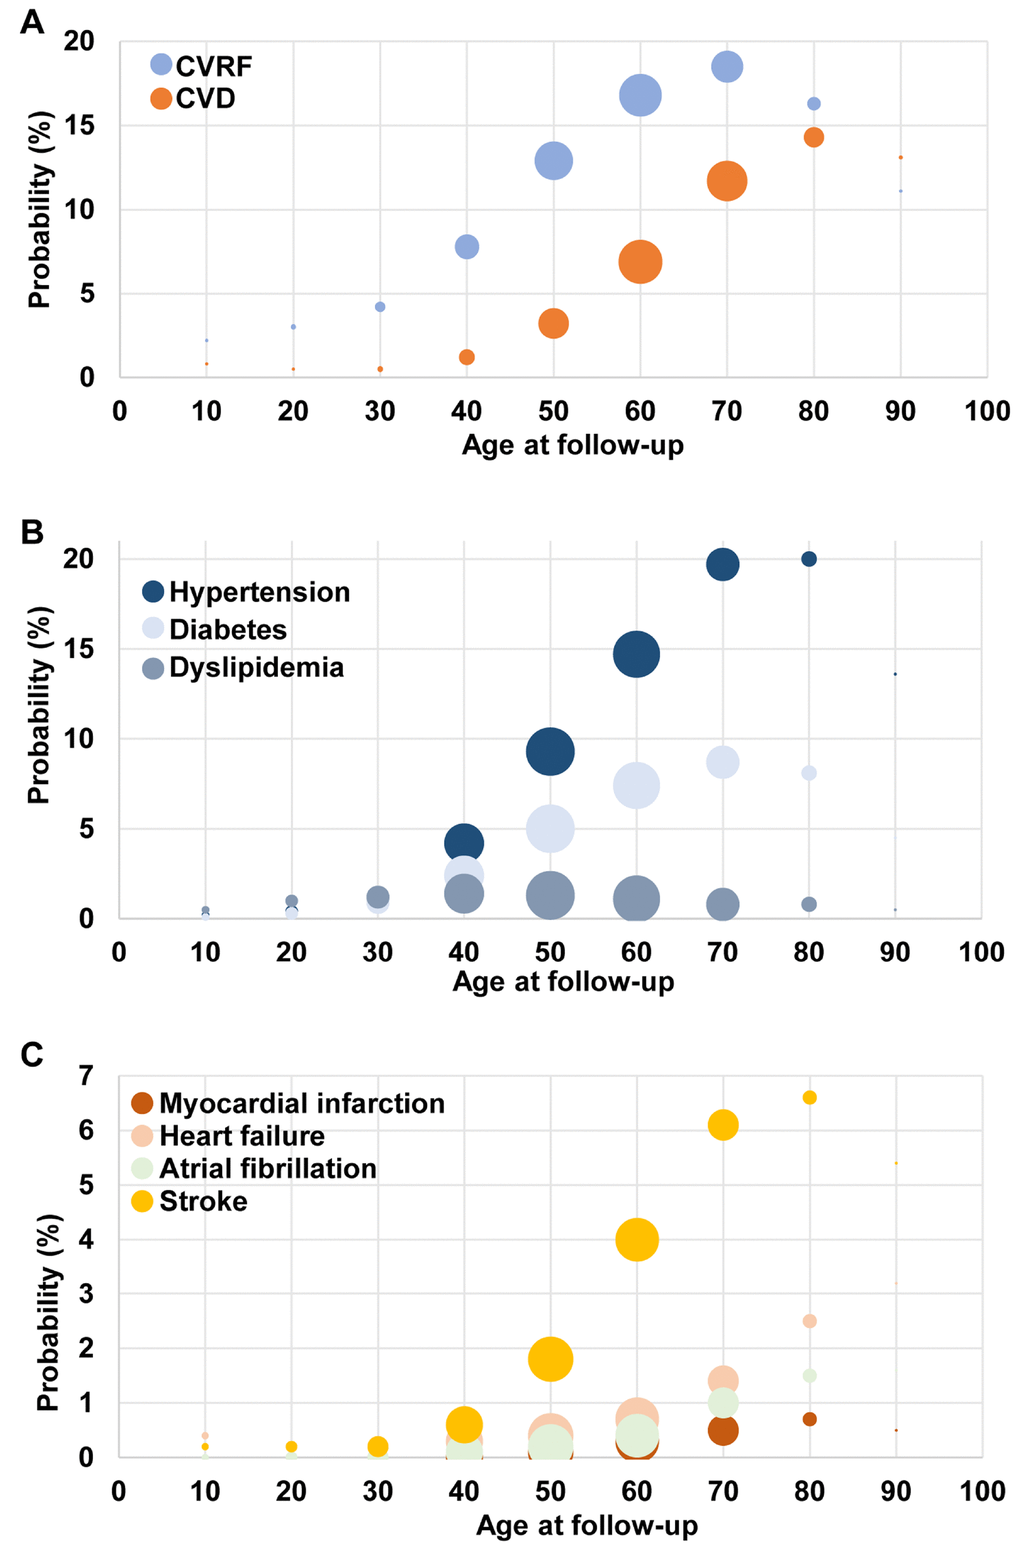 Prevalence of cardiovascular comorbid condition by age groups. Comparison among cancer patients (A) cardiovascular disease (CVD) and cardiovascular risk factor (CVRF); (B) CVRF; (C) CVD.